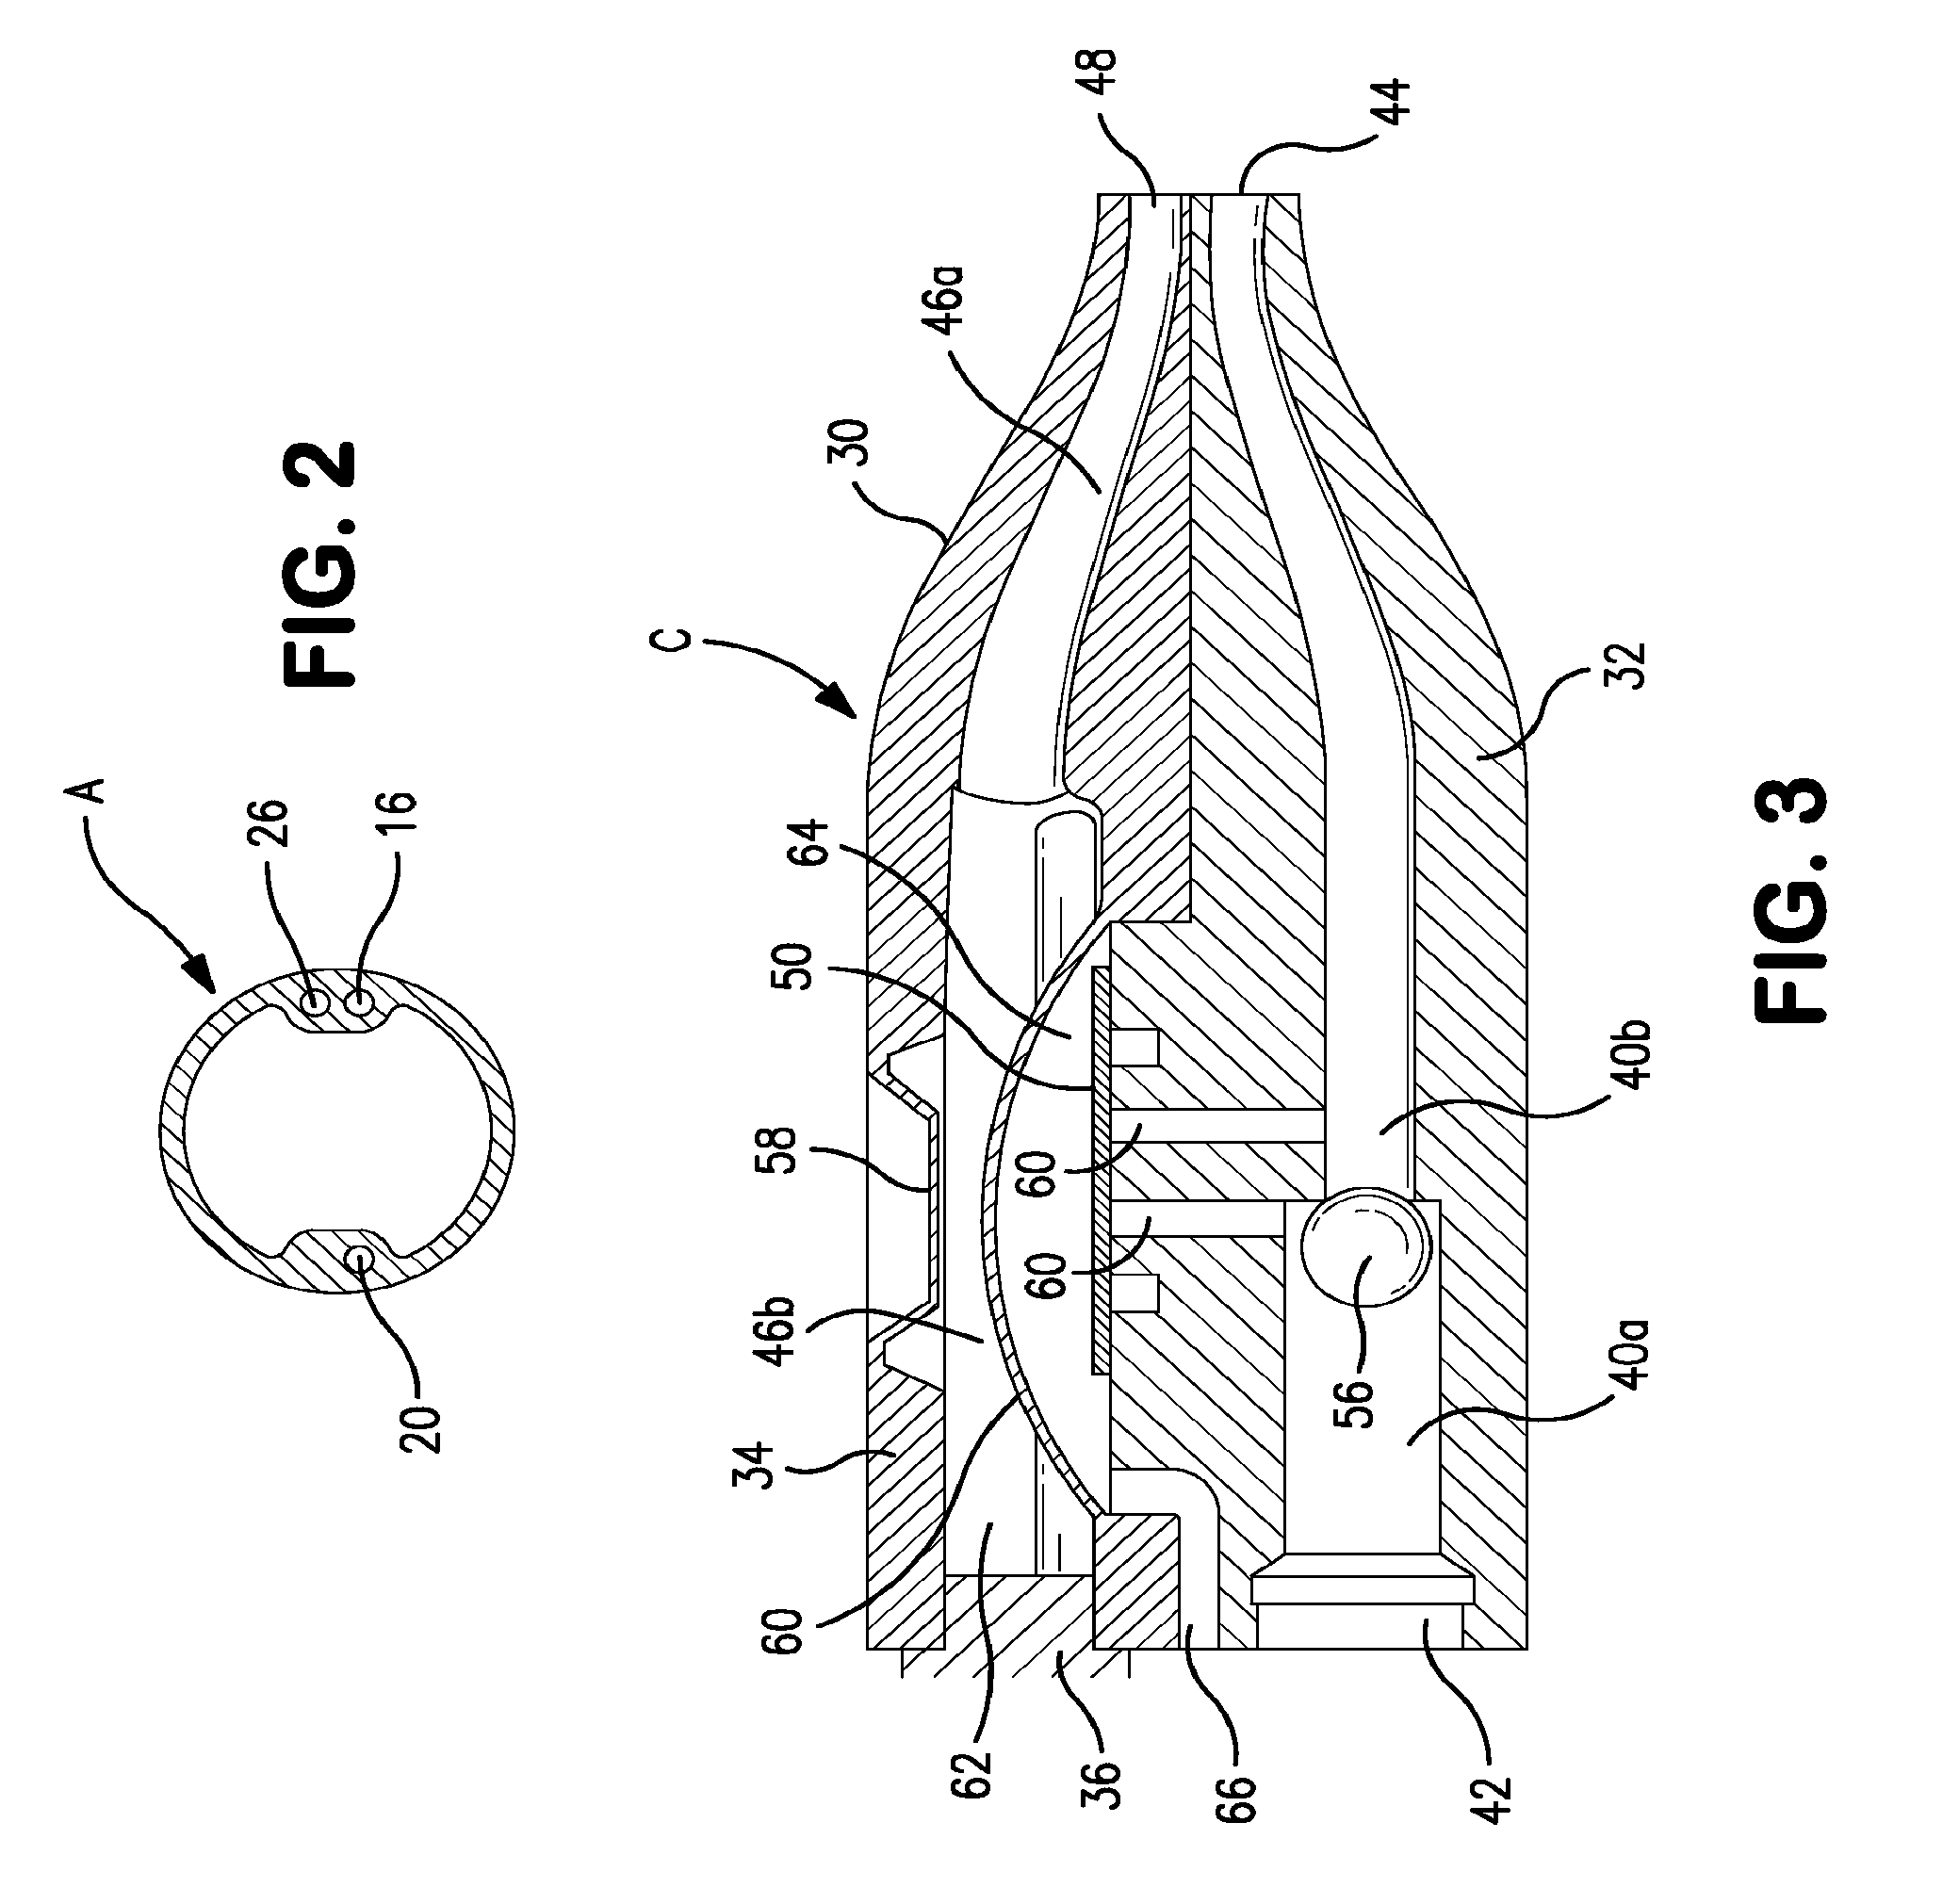 Apparatus for preventing over inflation of the retention balloon in medical catheters and airway devices